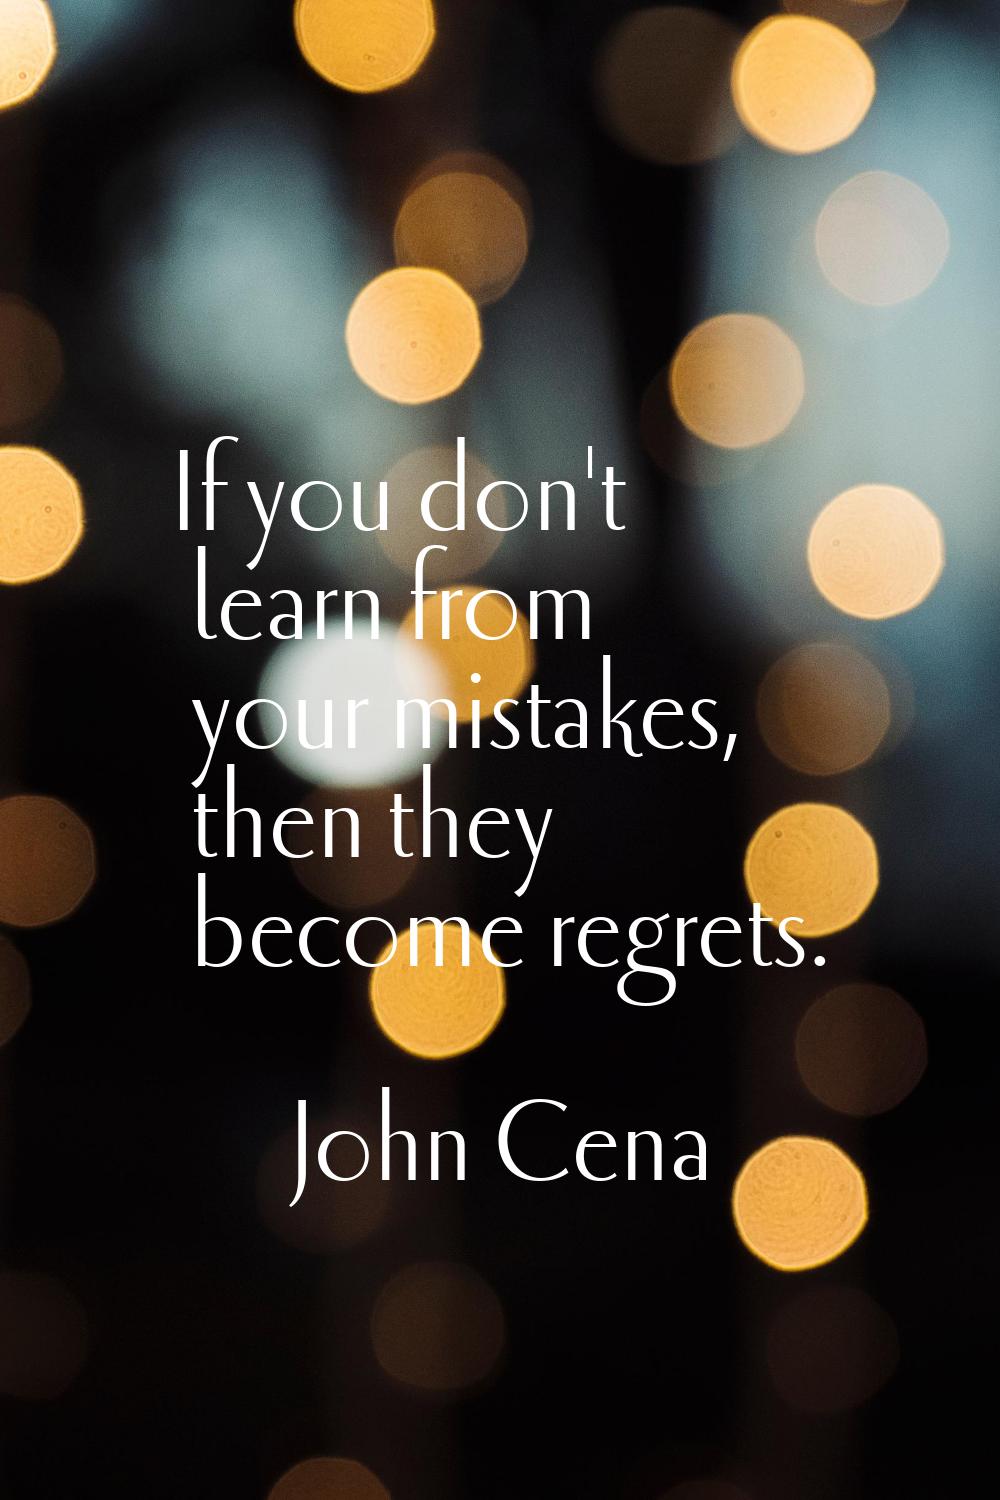 If you don't learn from your mistakes, then they become regrets.